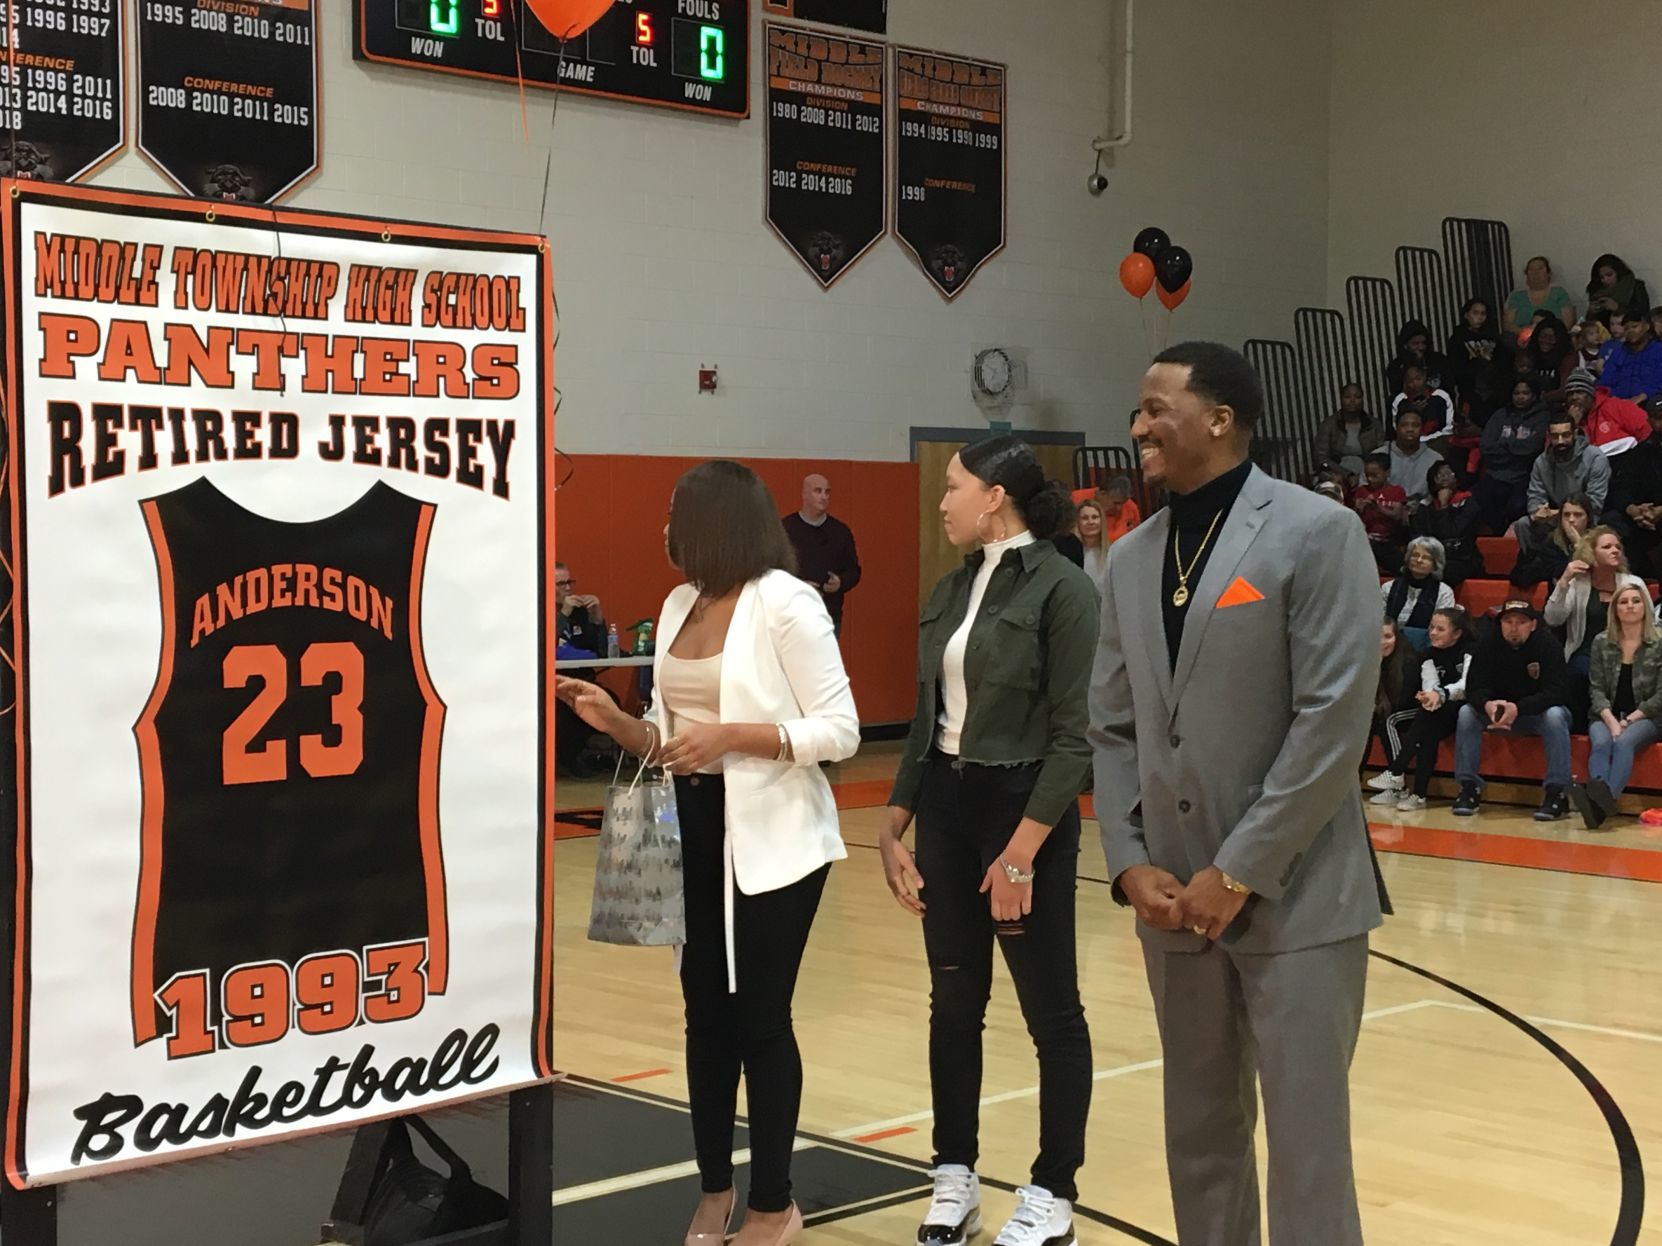 Stephano Anderson's jersey retired 